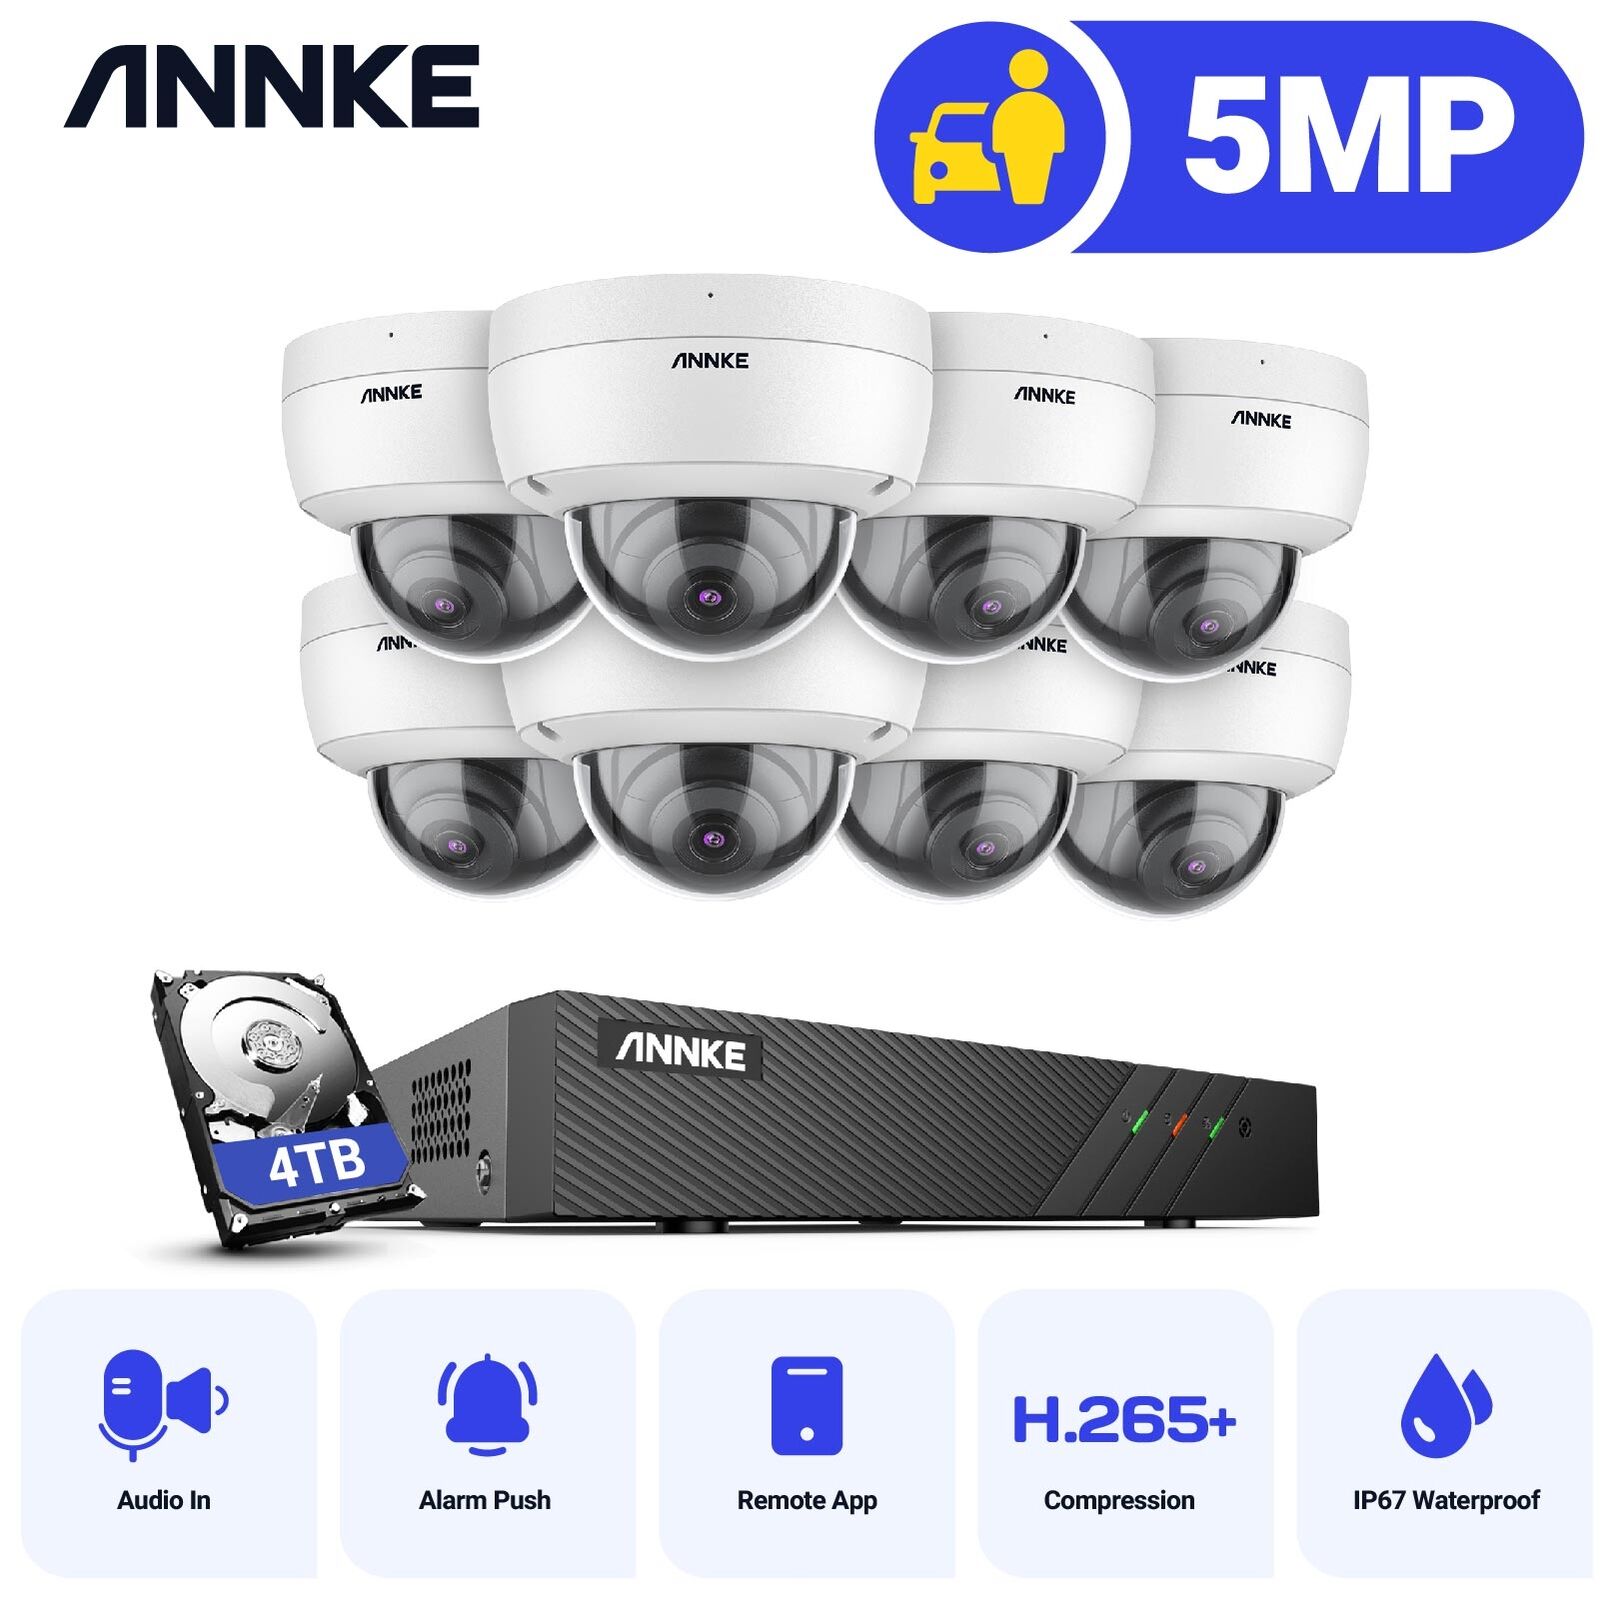 ANNKE 8CH NVR 5MP Home PoE Surveillance IP Security Camera System Outdoor H.265+